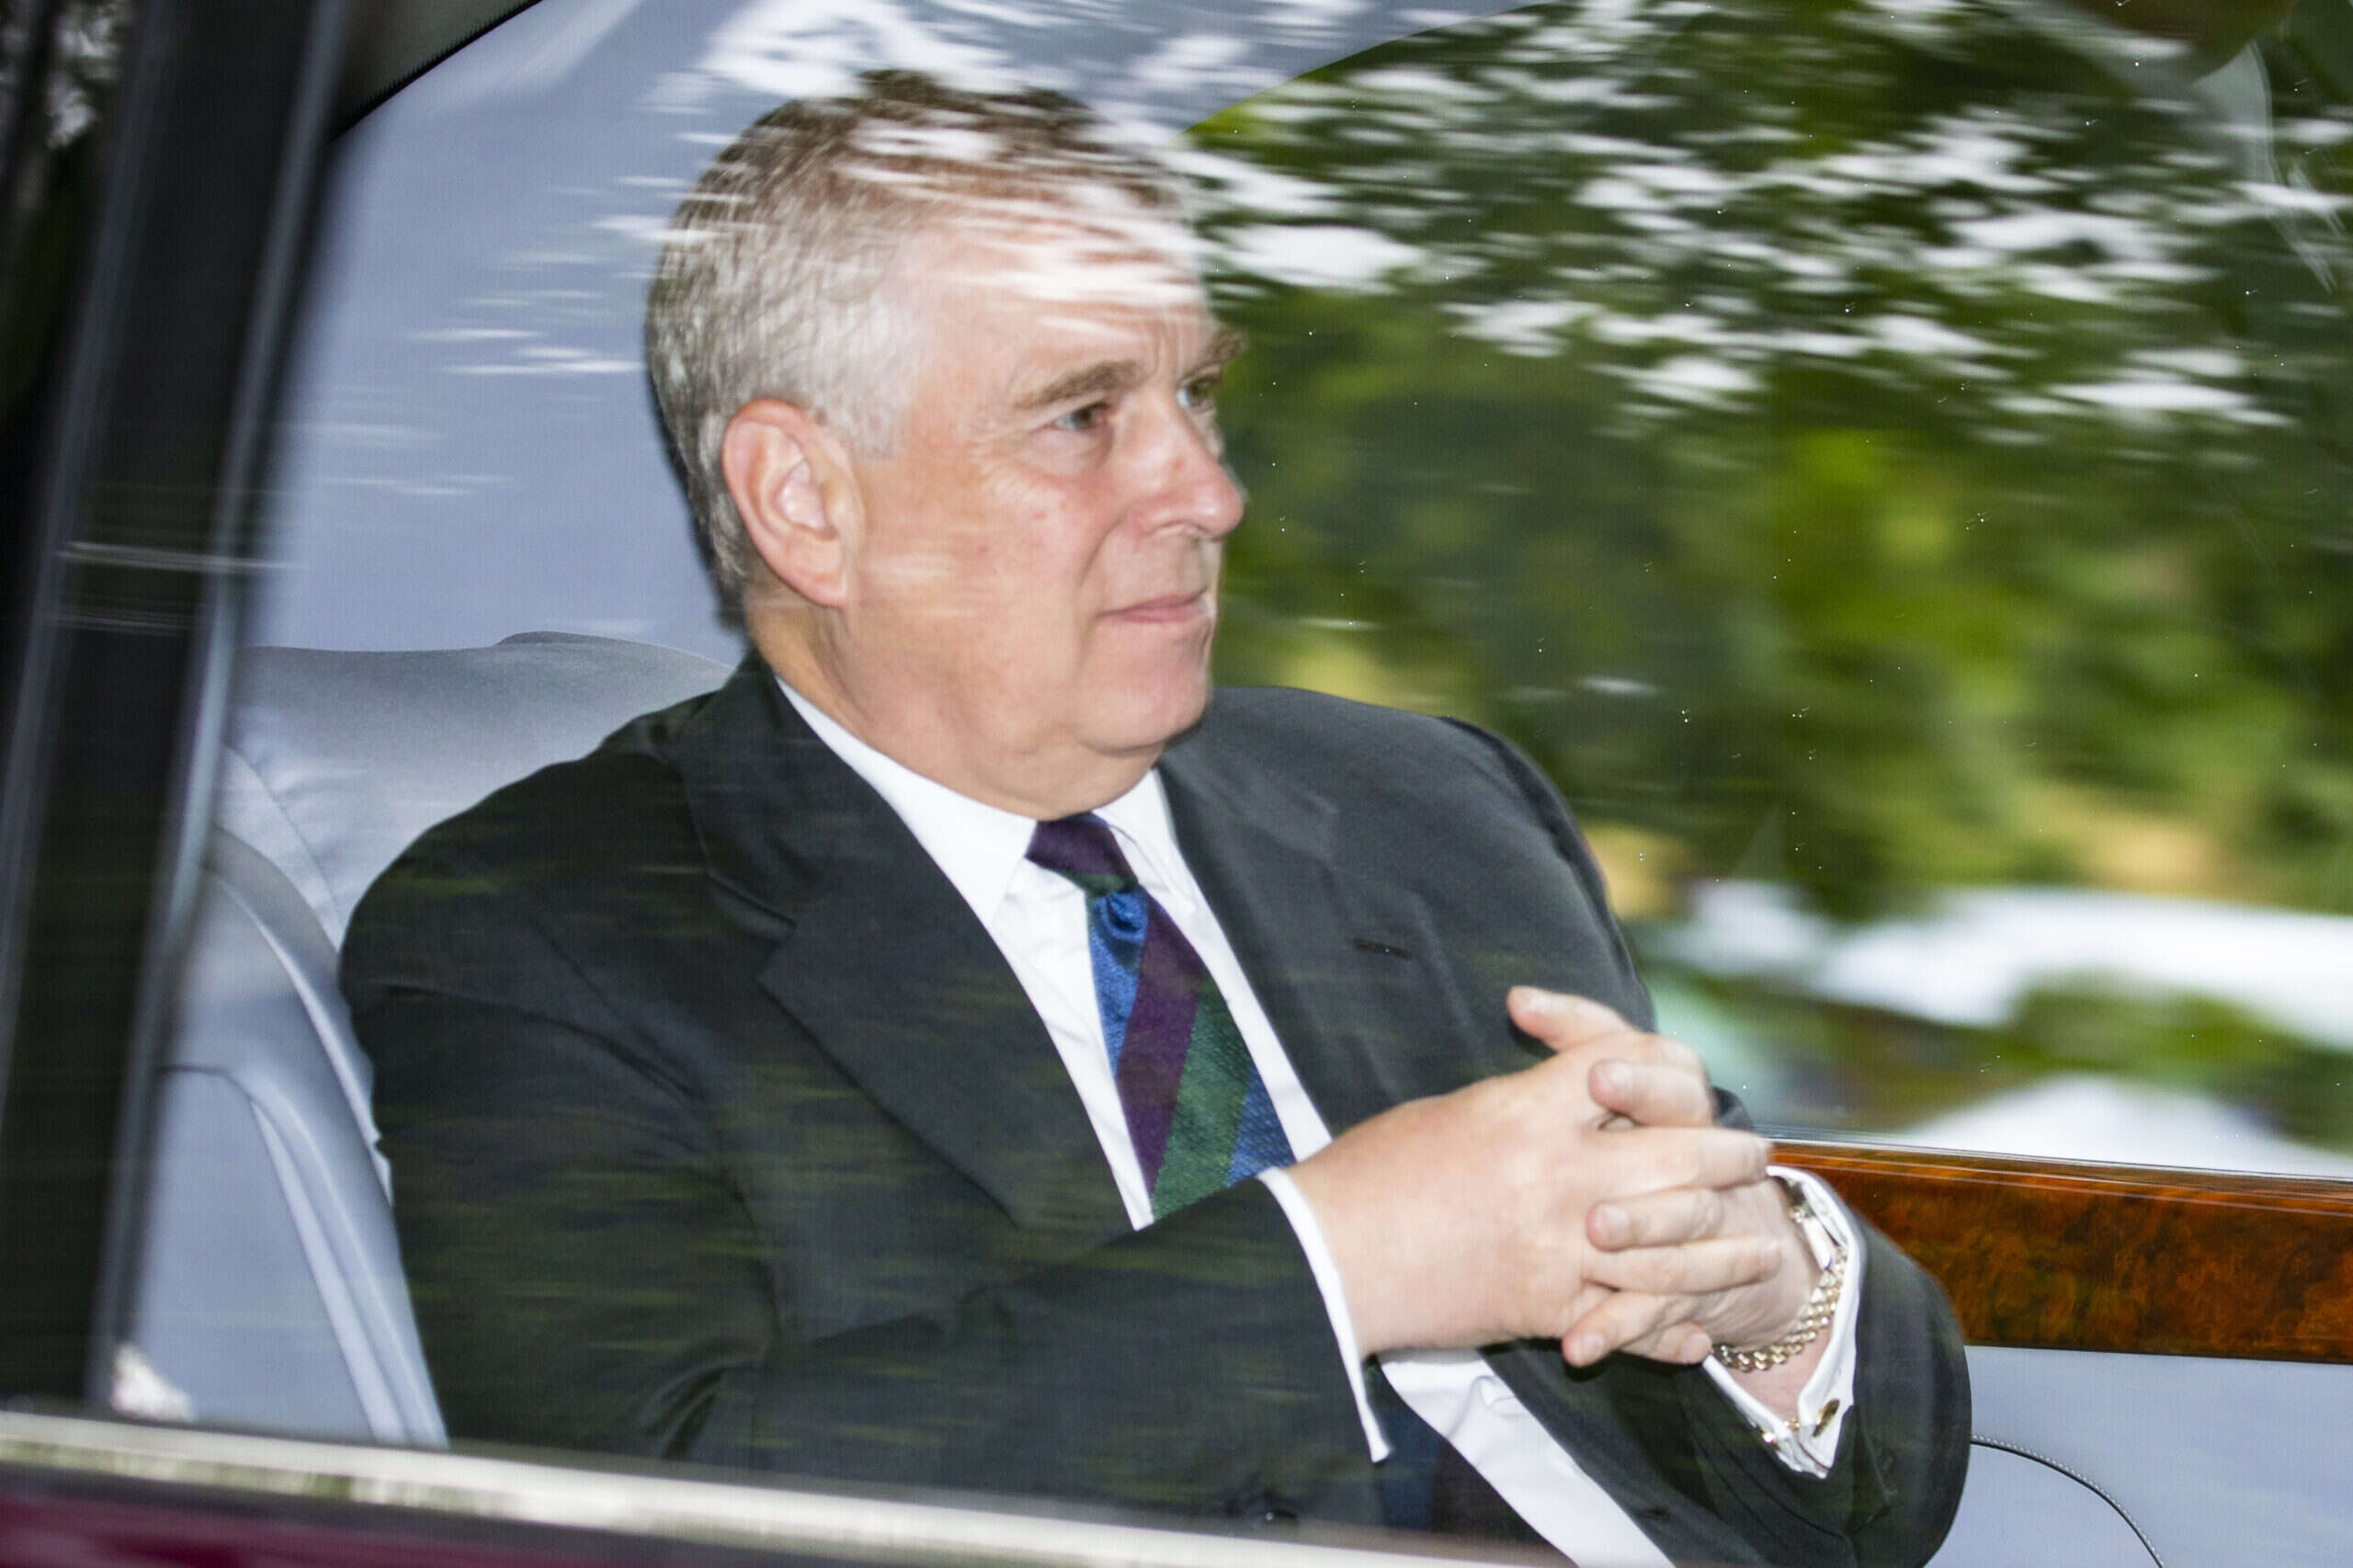 Should Prince Andrew be forgiven?